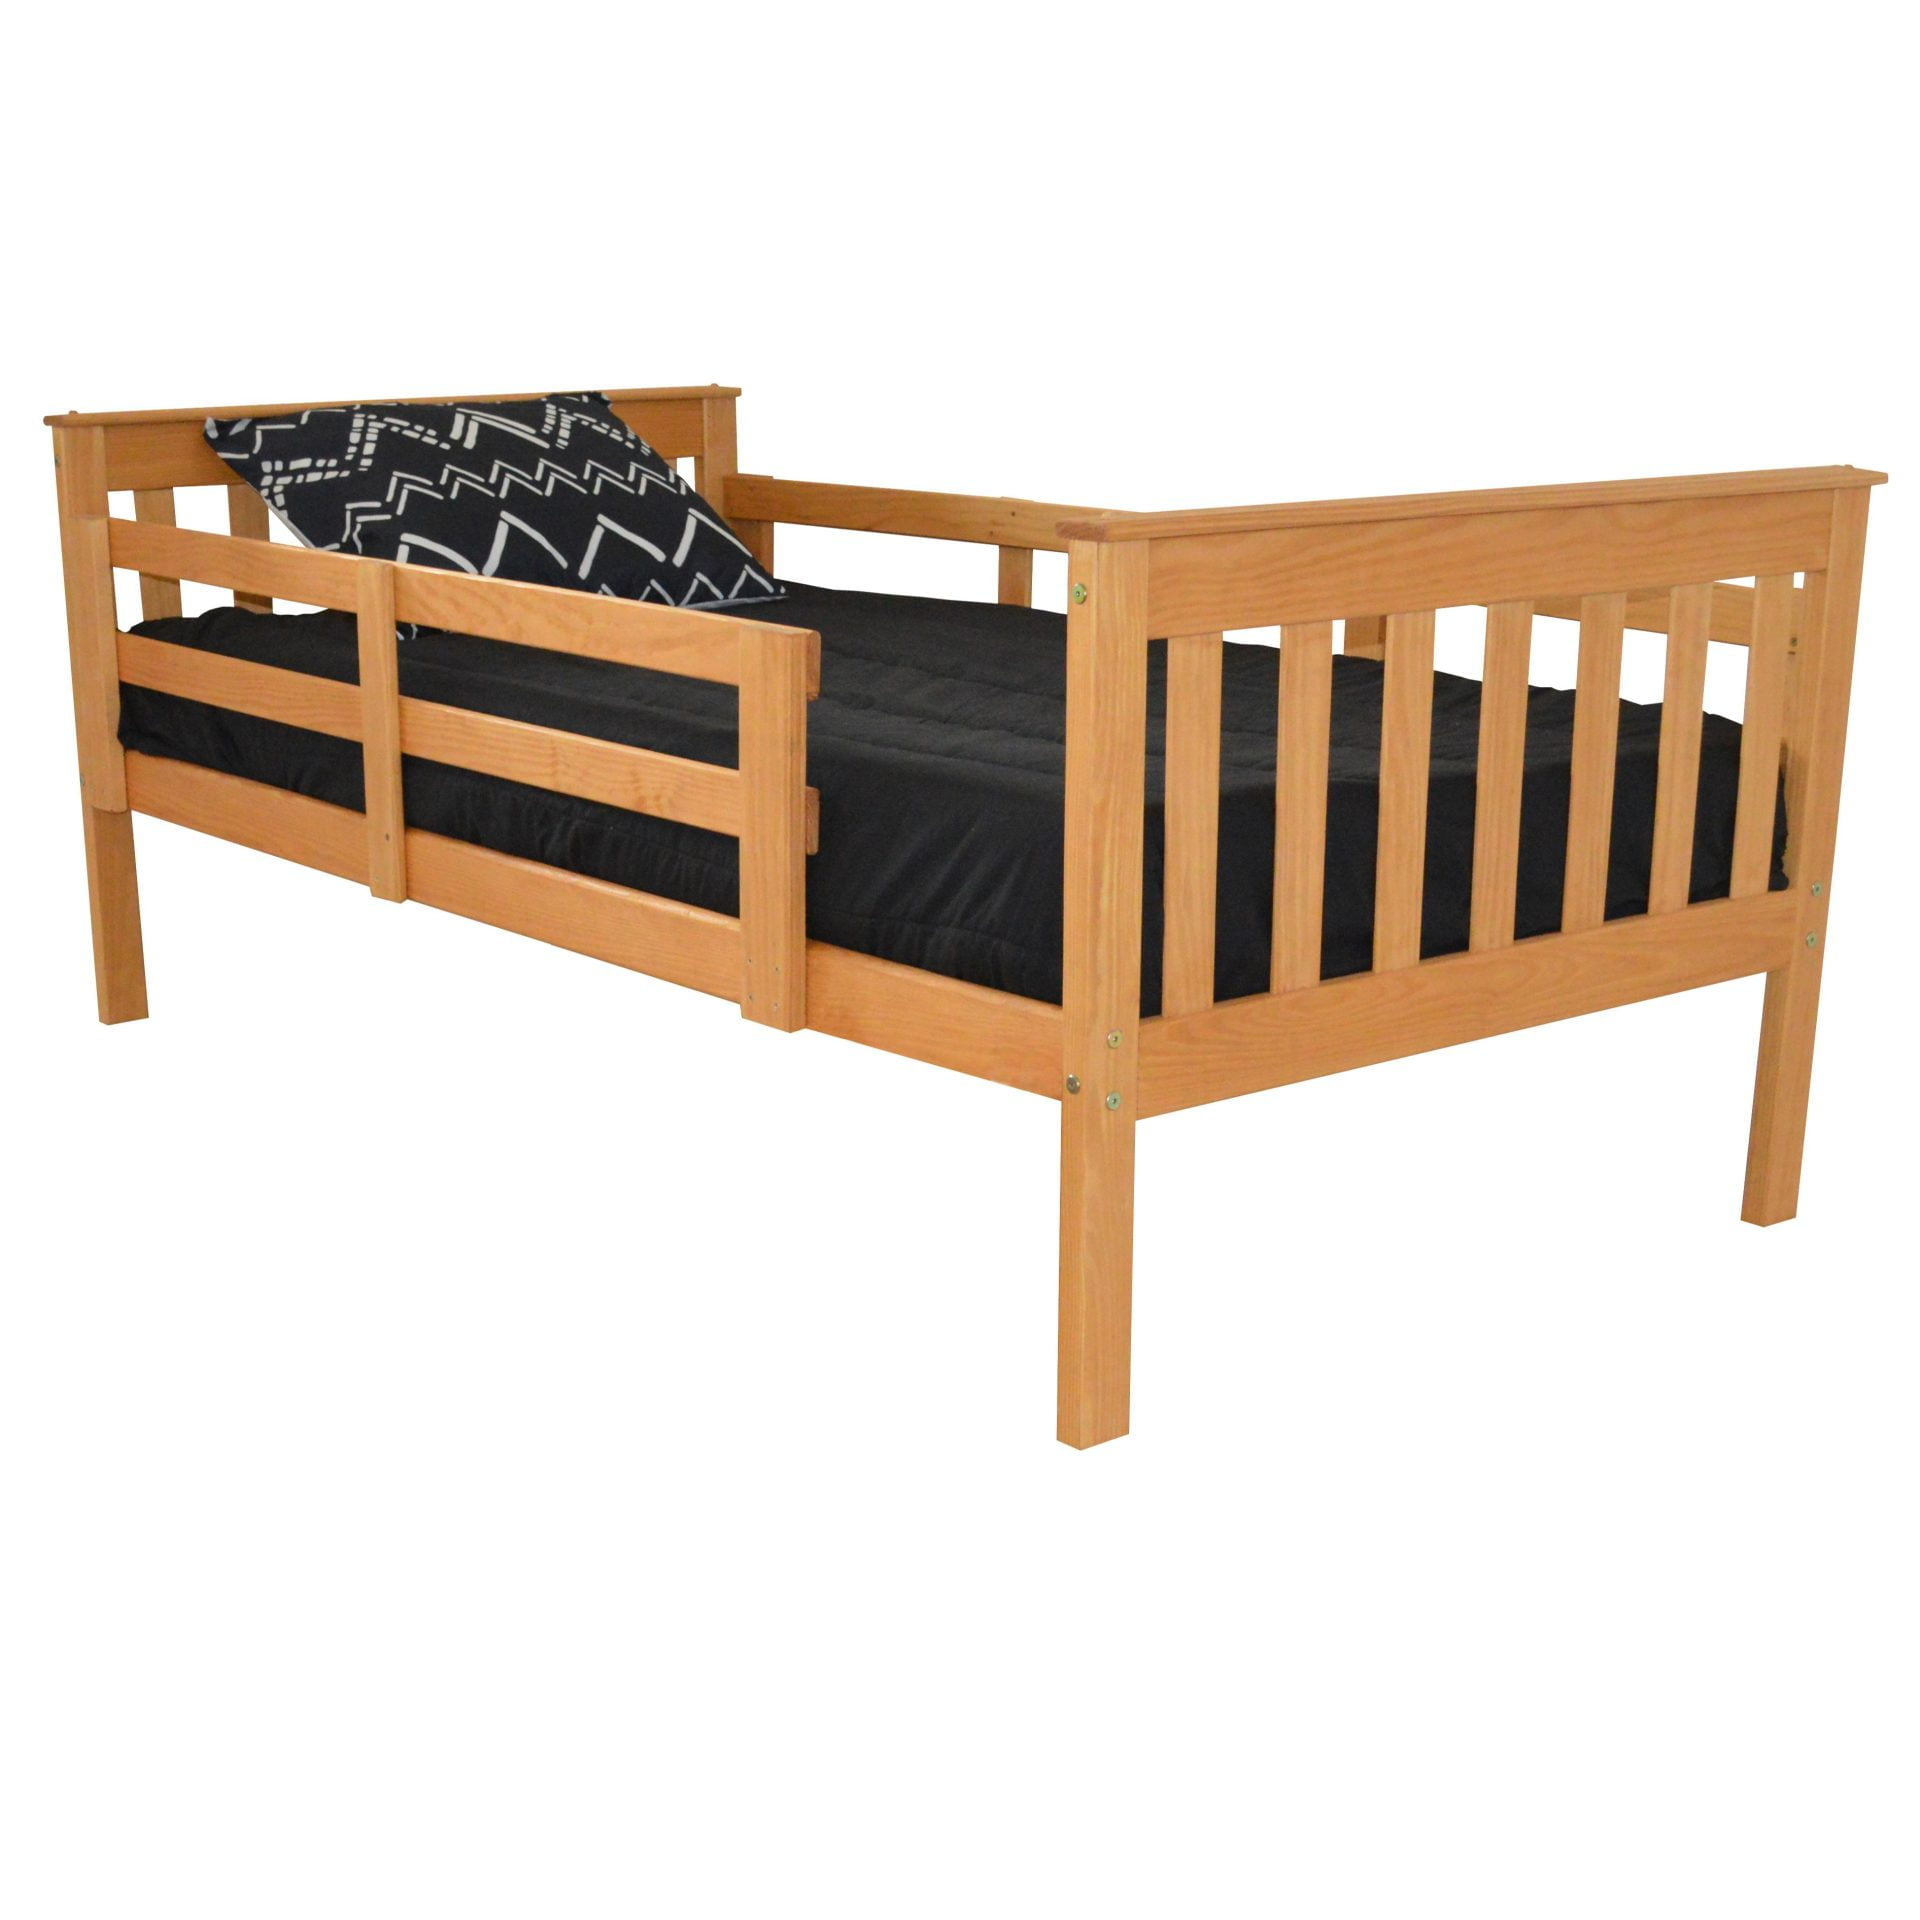 A&L Furniture VersaLoft Mission Bed with Safety Rails -Twin and Full Sizes